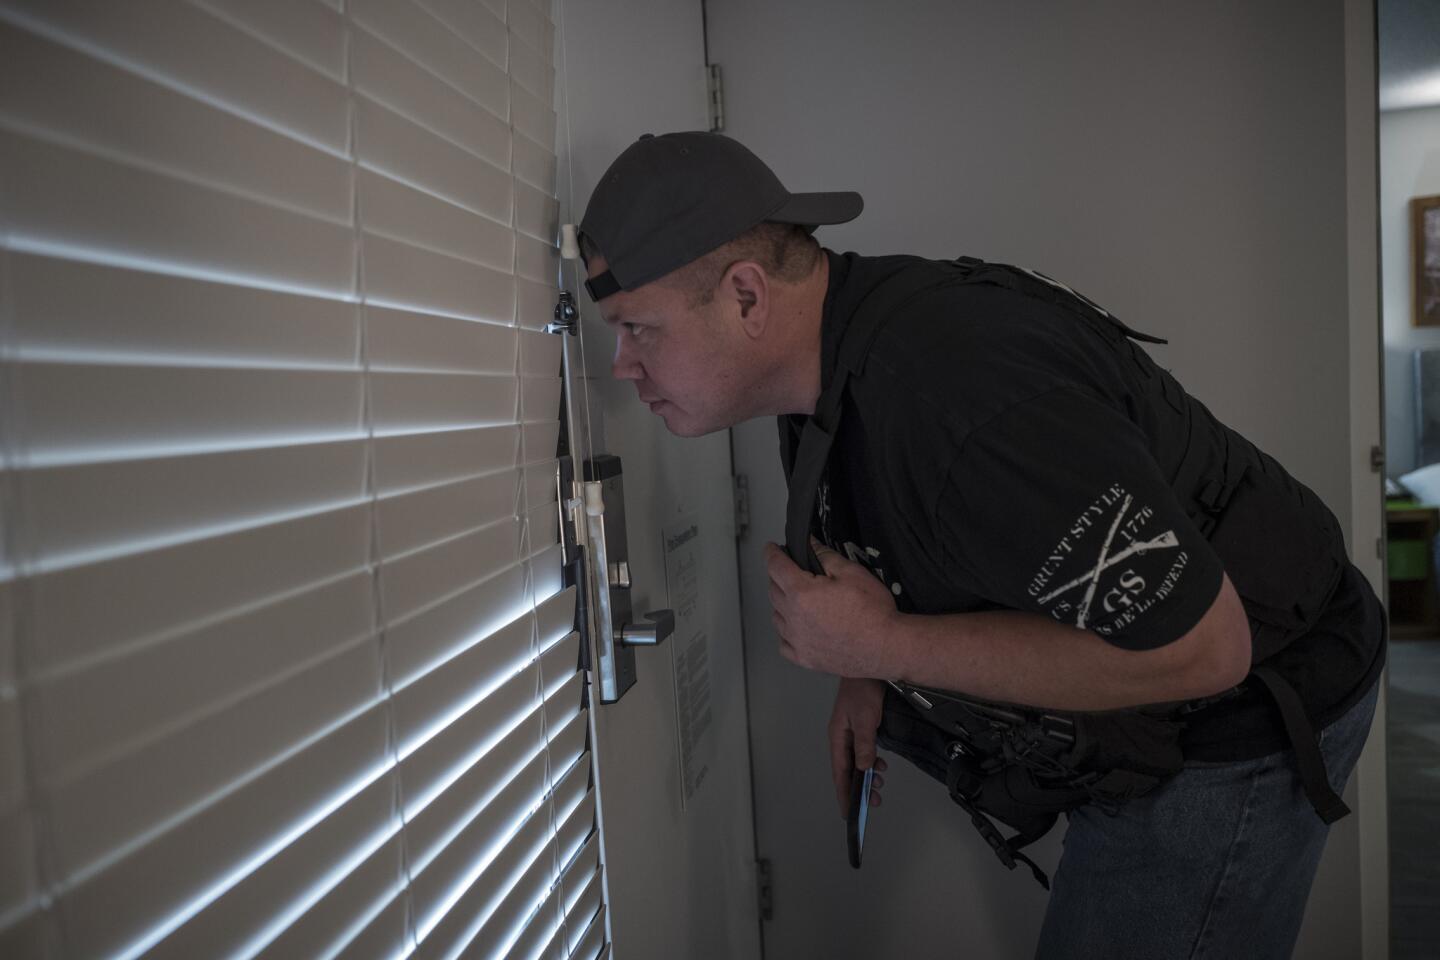 At a Santa Clara hotel for a sting operation targeting prostitution and human trafficking, California Parole Officer J. Routt waits for suspects to arrive.